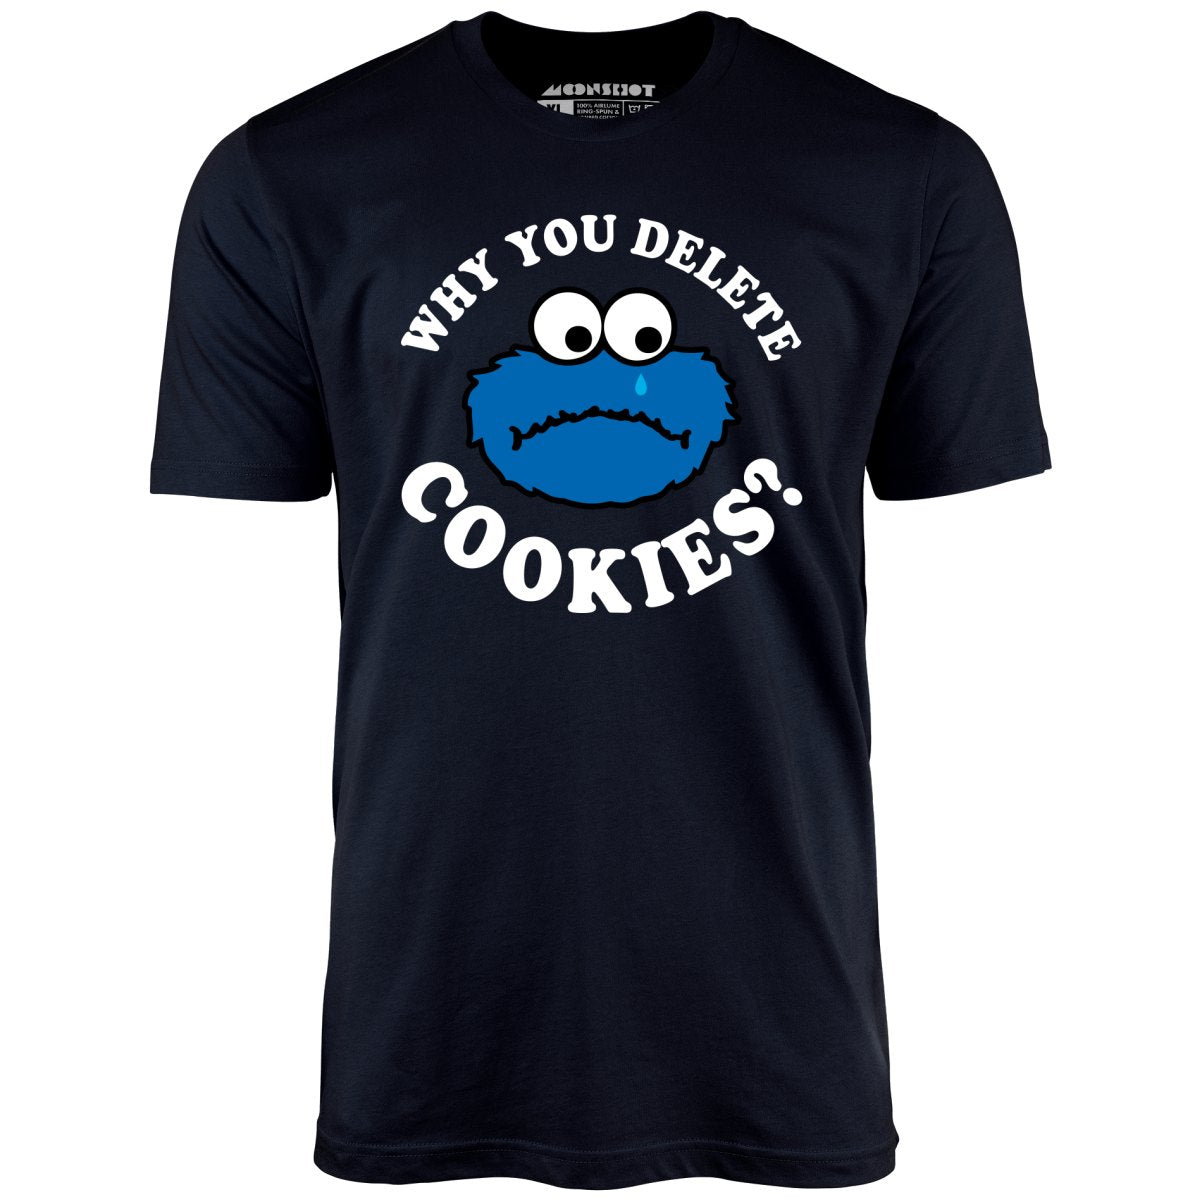 Why You Delete Cookies? - Unisex T-Shirt